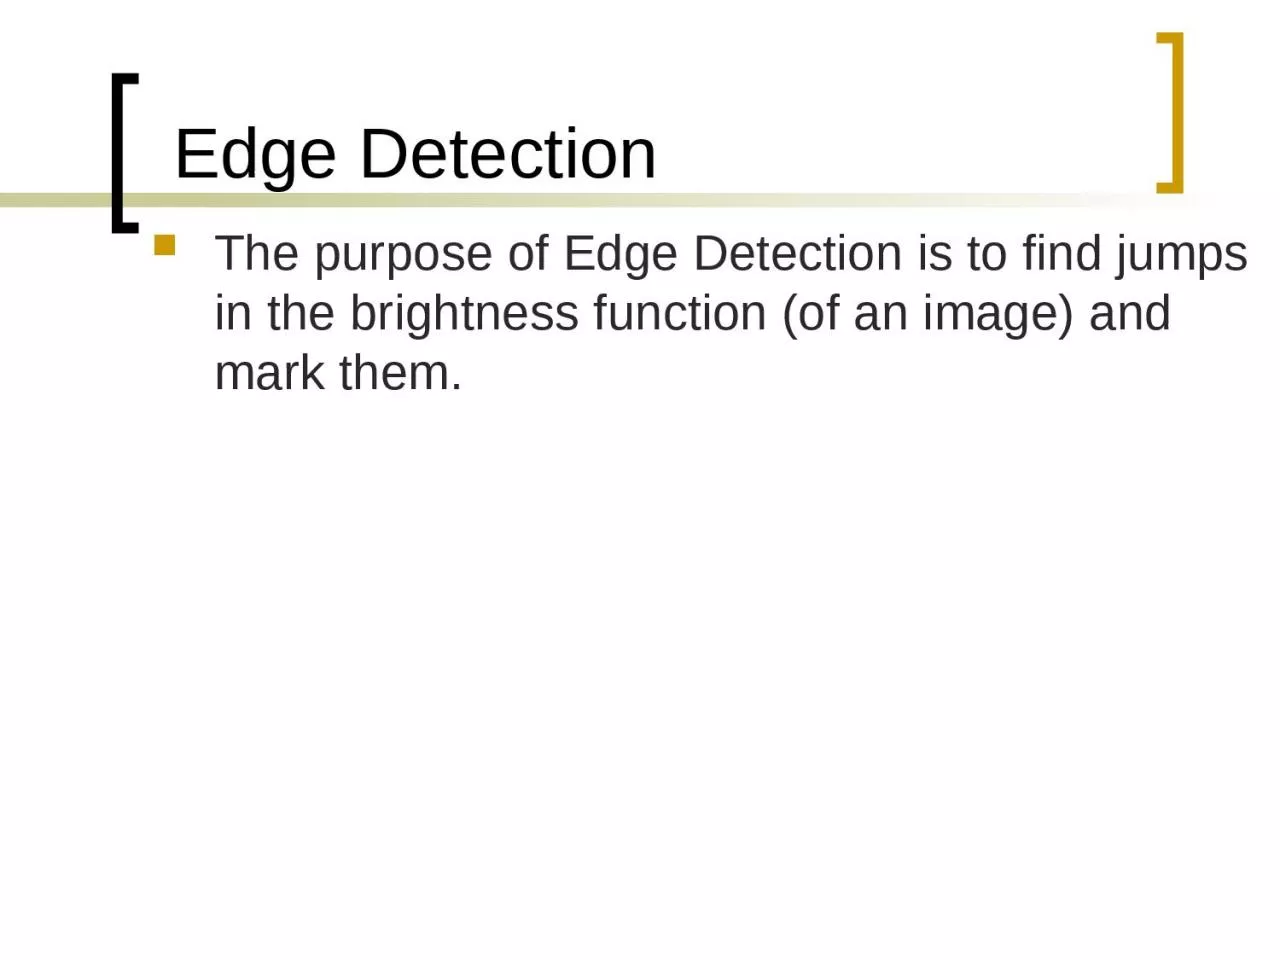 The purpose of Edge Detection is to find jumps in the brightness function (of an image)